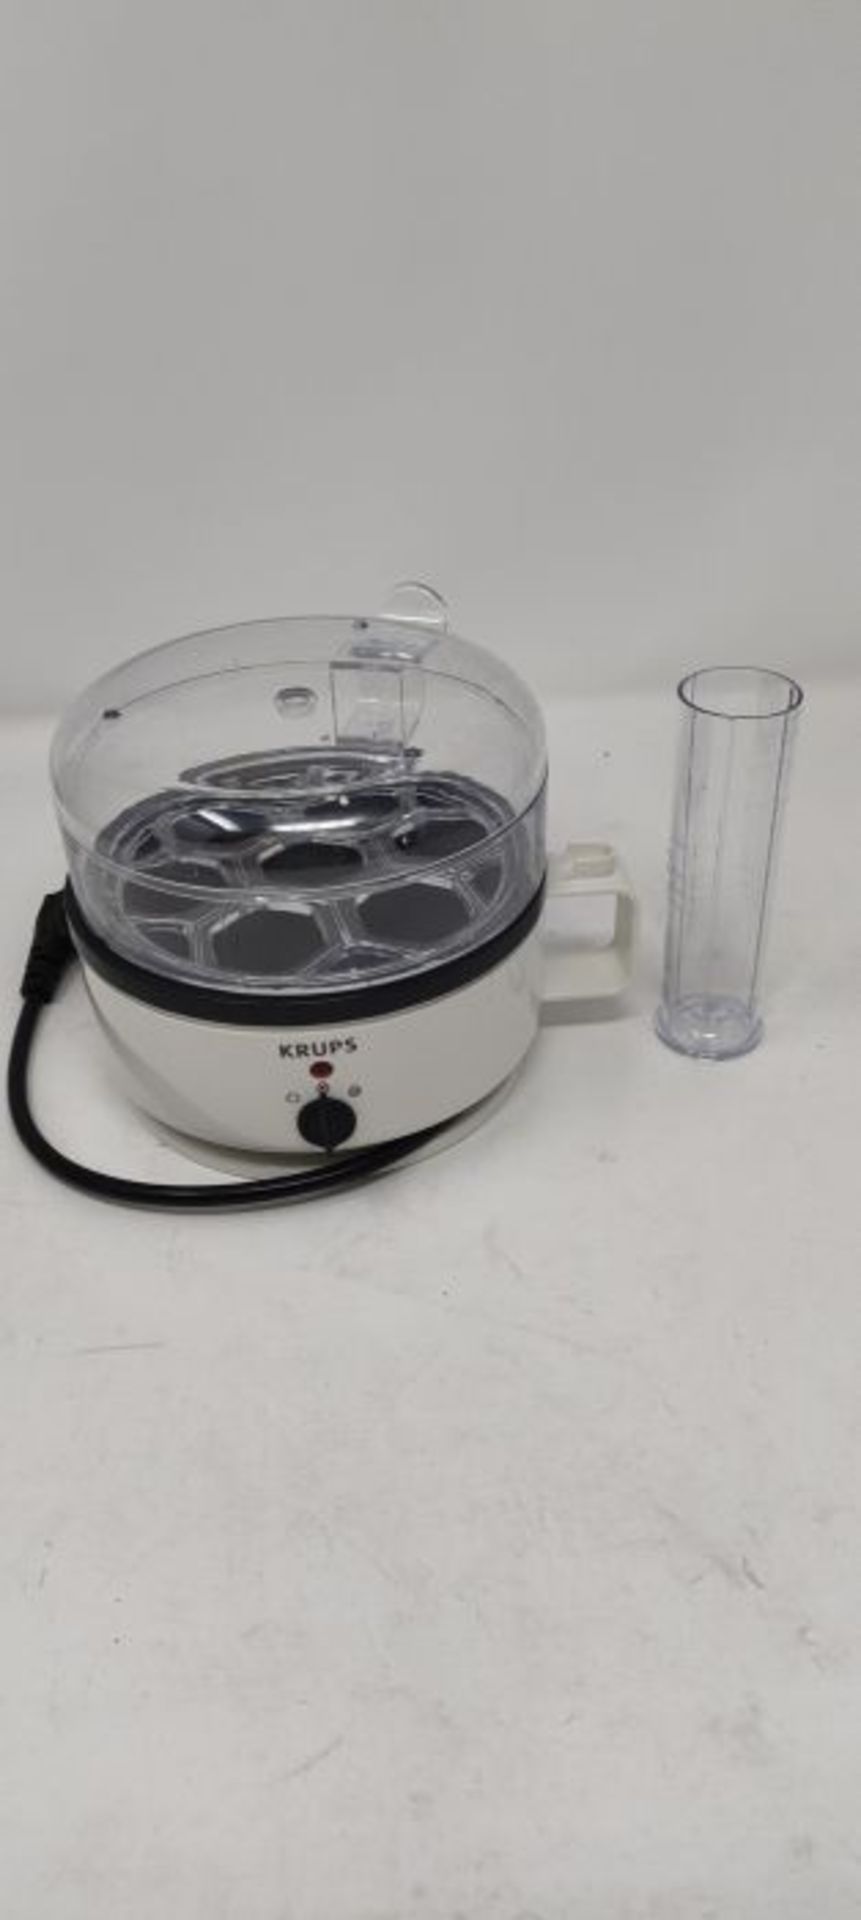 Krups F 230 70- egg cookers (18.500 cm, 18.500 cm, 14.500 cm) - Image 3 of 3